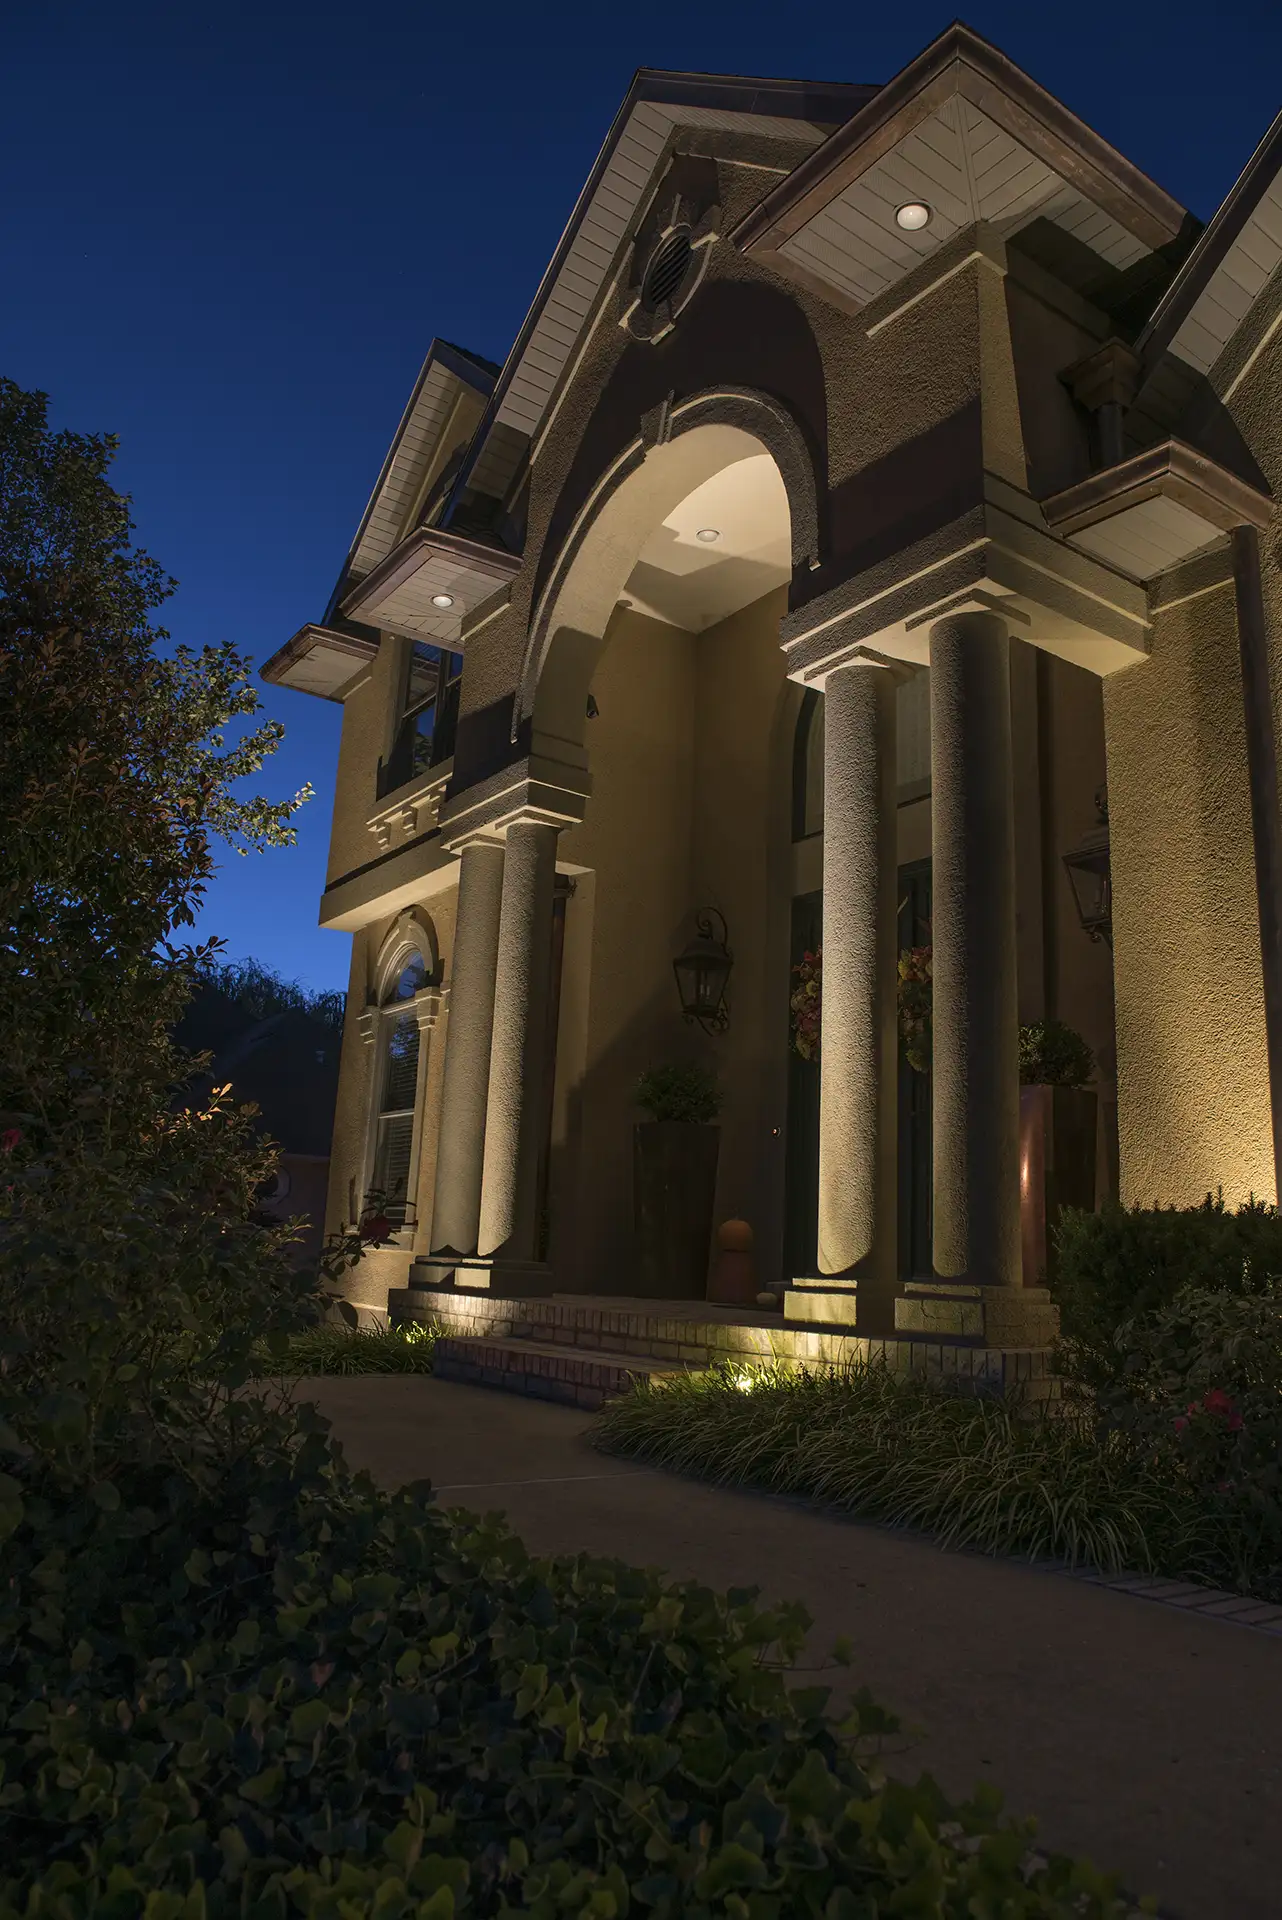 Suburb Stucco image 4 front entry columns Lighthouse Outdoor Lighting and Audio central Missouri